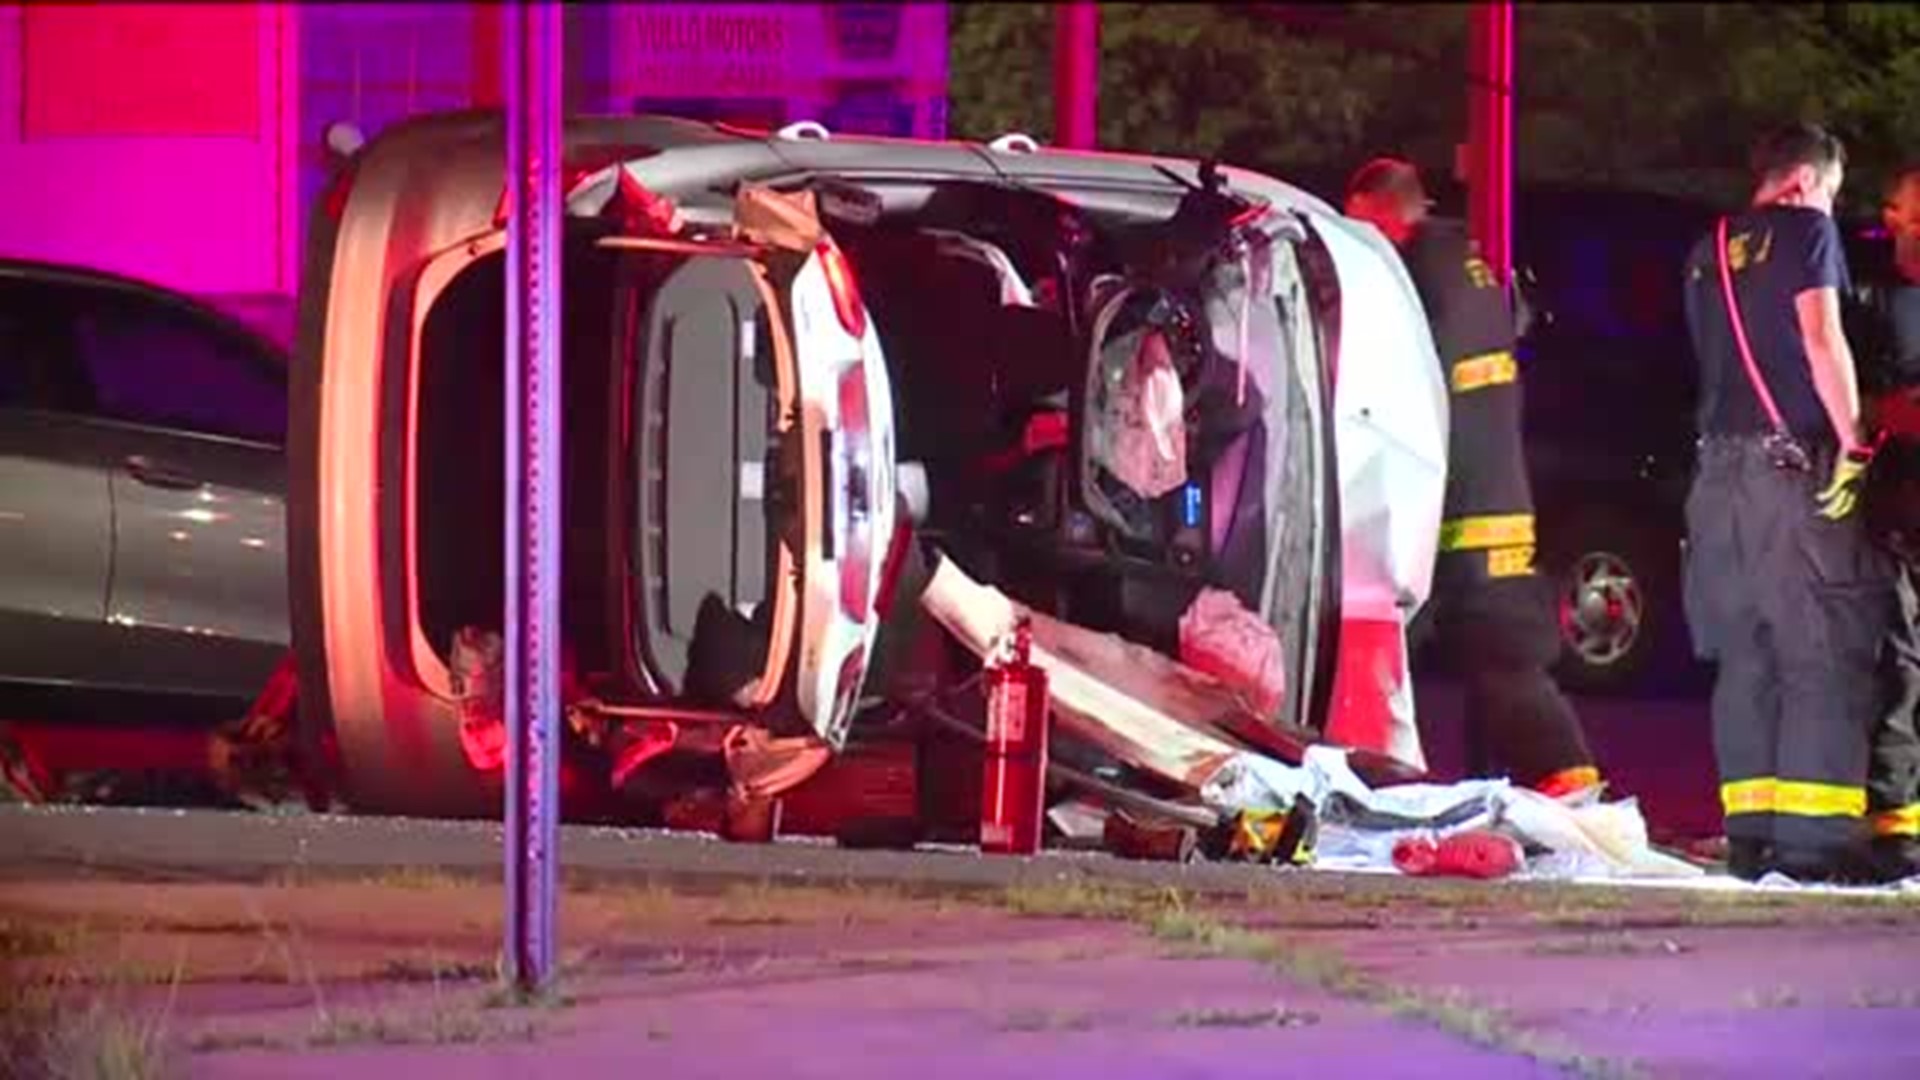 At Least One Hurt After Crash in Scranton